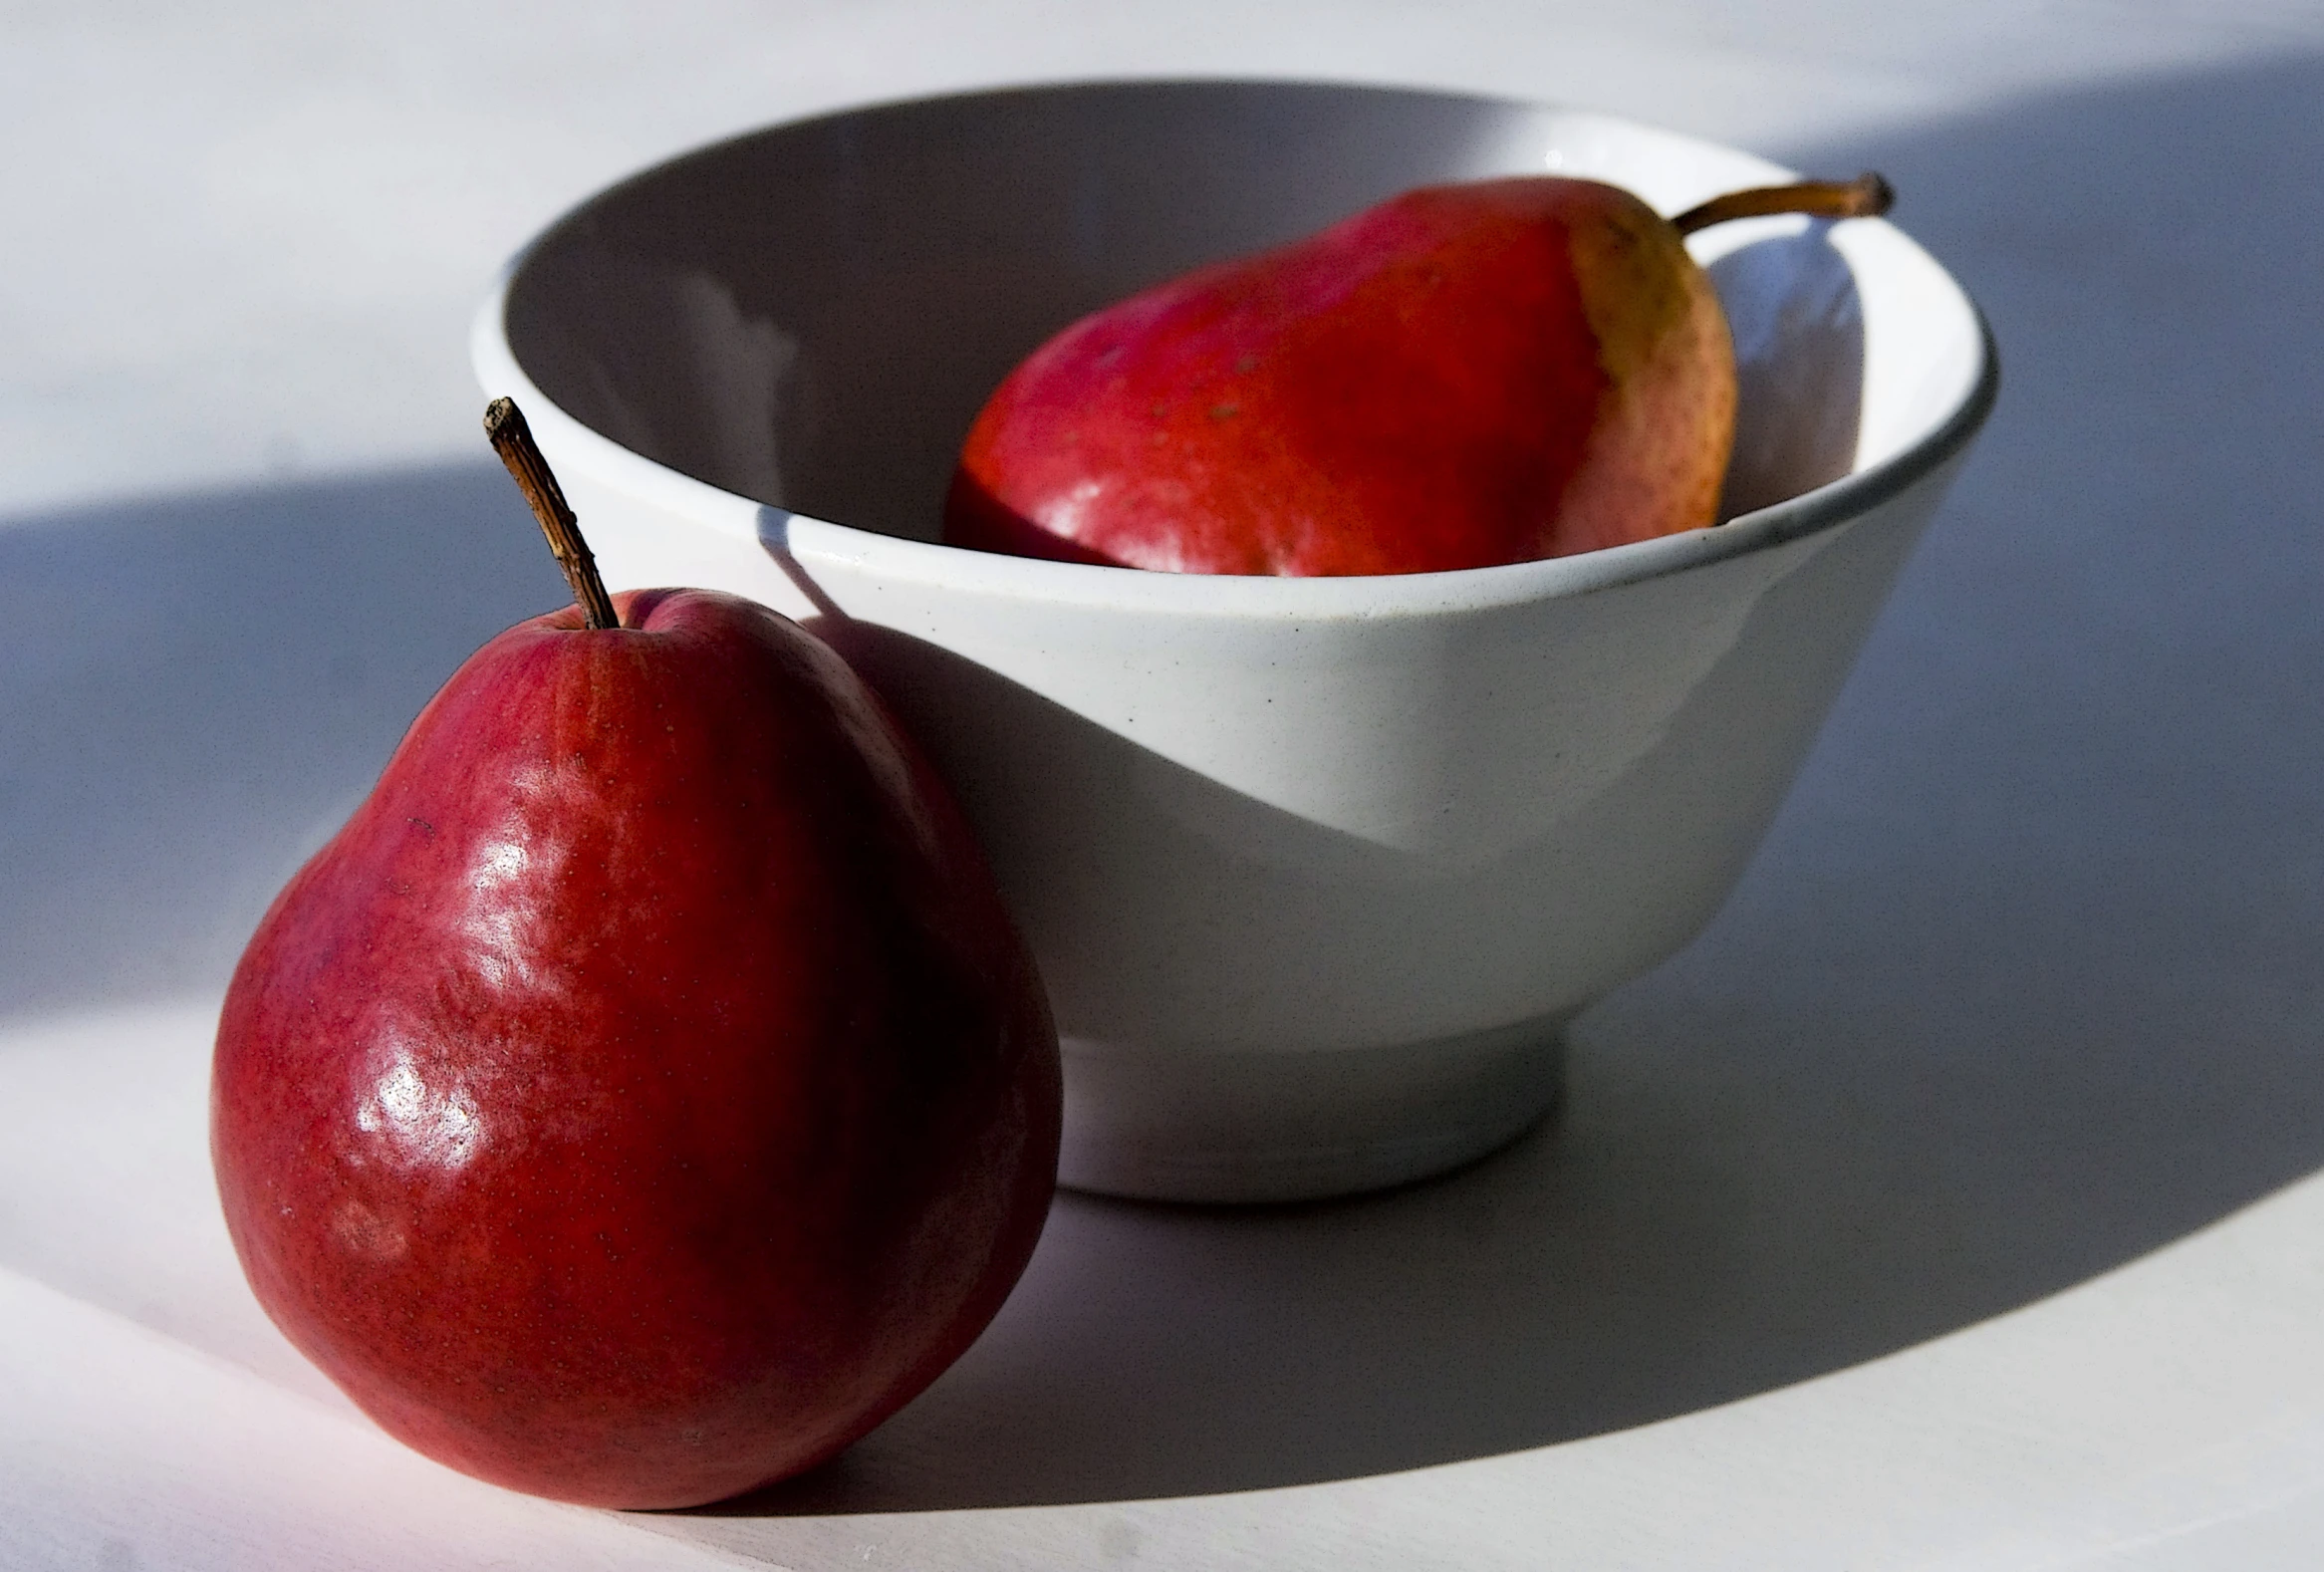 two ripe apples and a whole red apple in a bowl